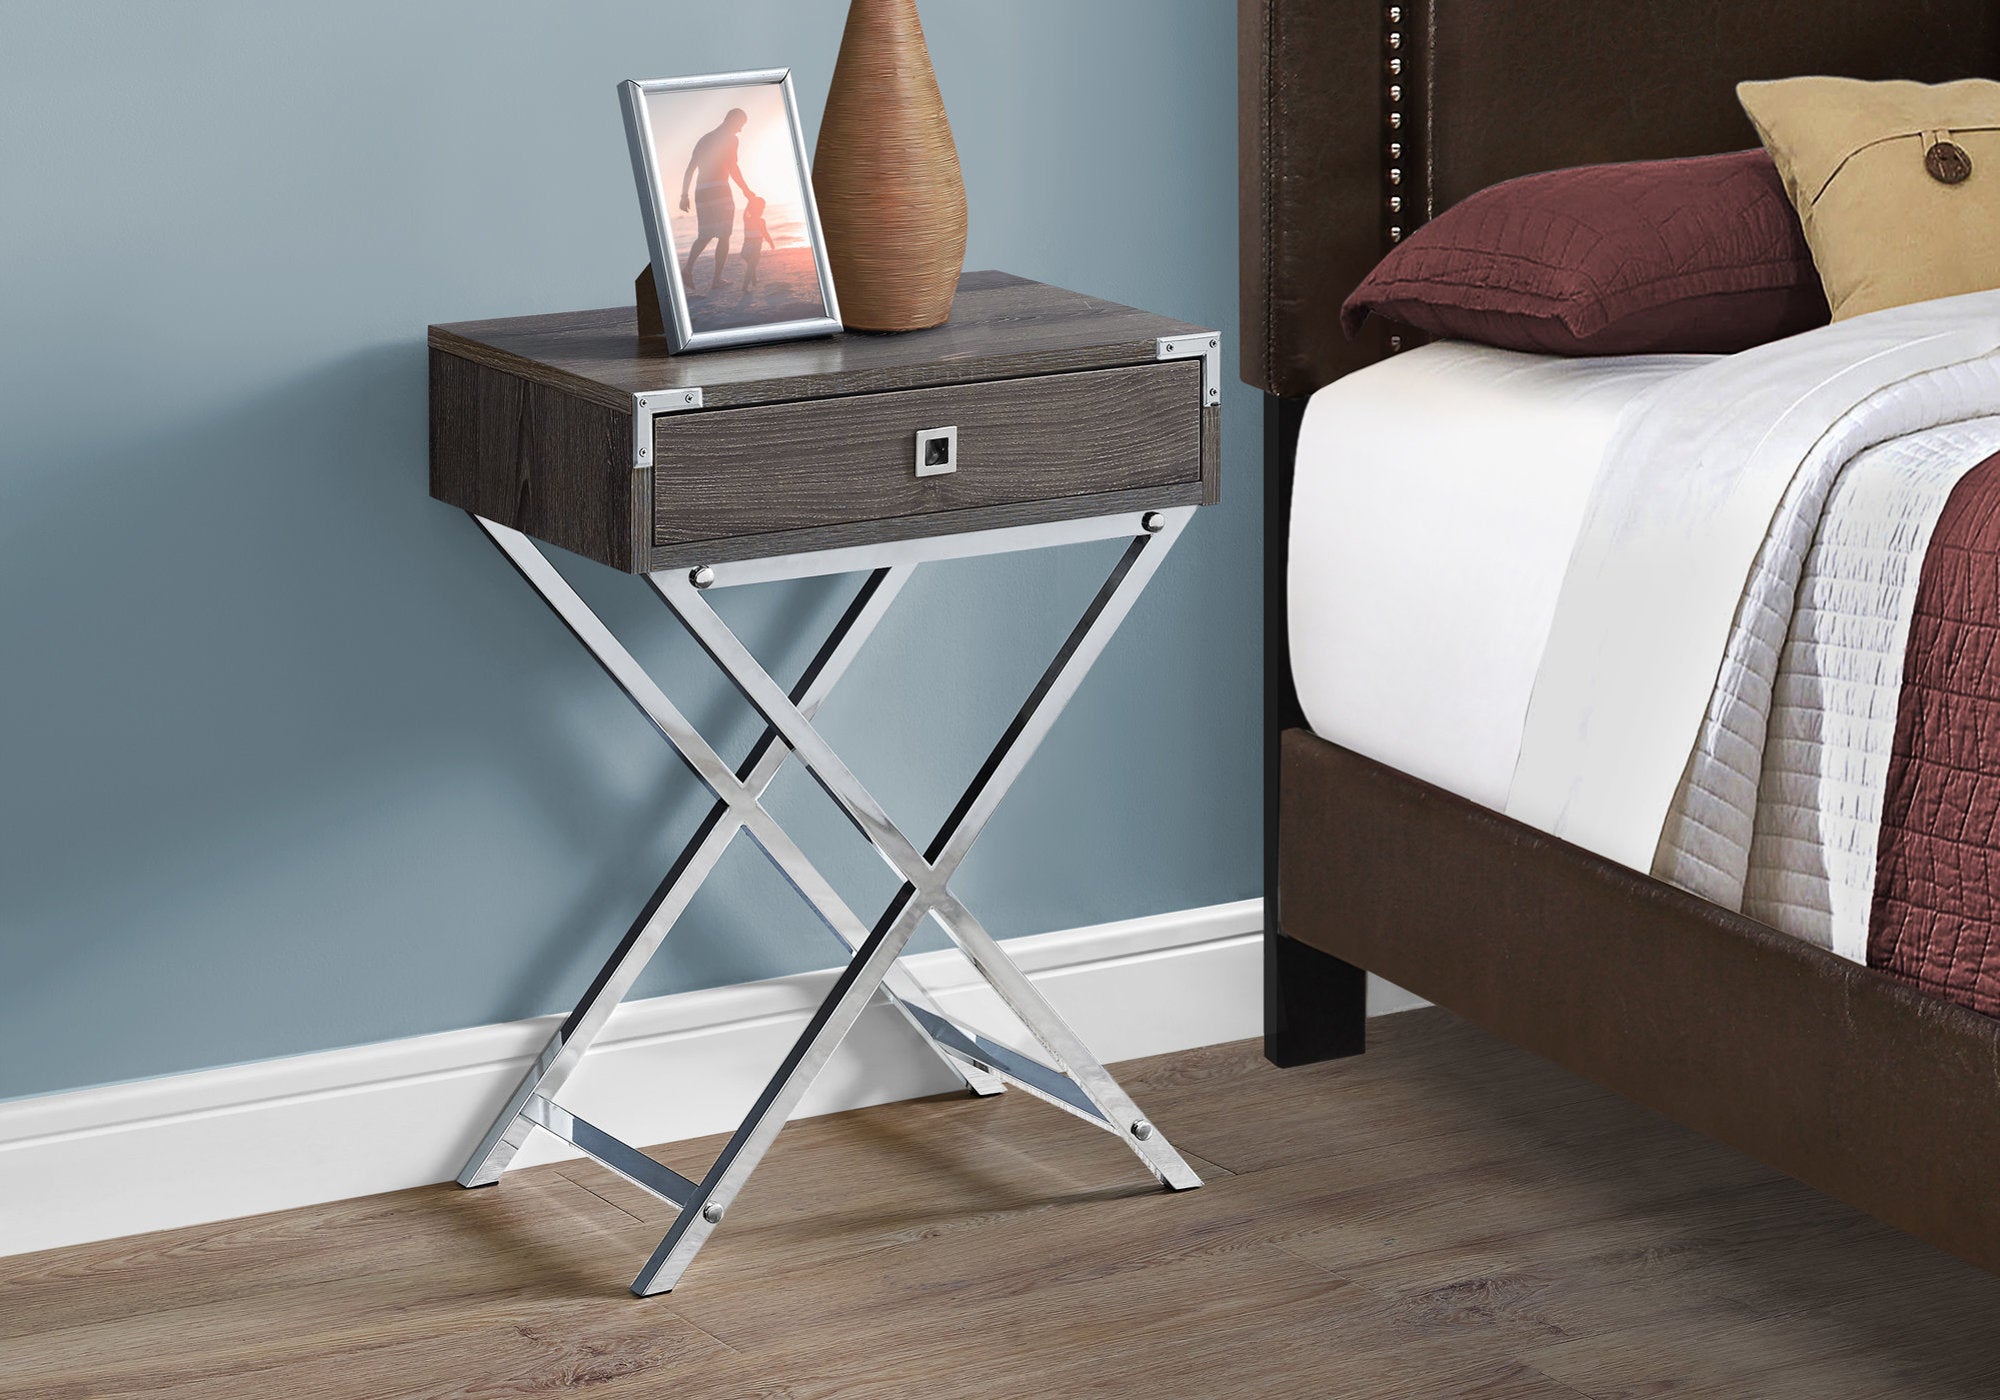 MN-313555    Accent Table, Side, End, Nightstand, Lamp, Living Room, Bedroom, Metal Legs, Laminate, Dark Taupe, Chrome, Contemporary, Modern